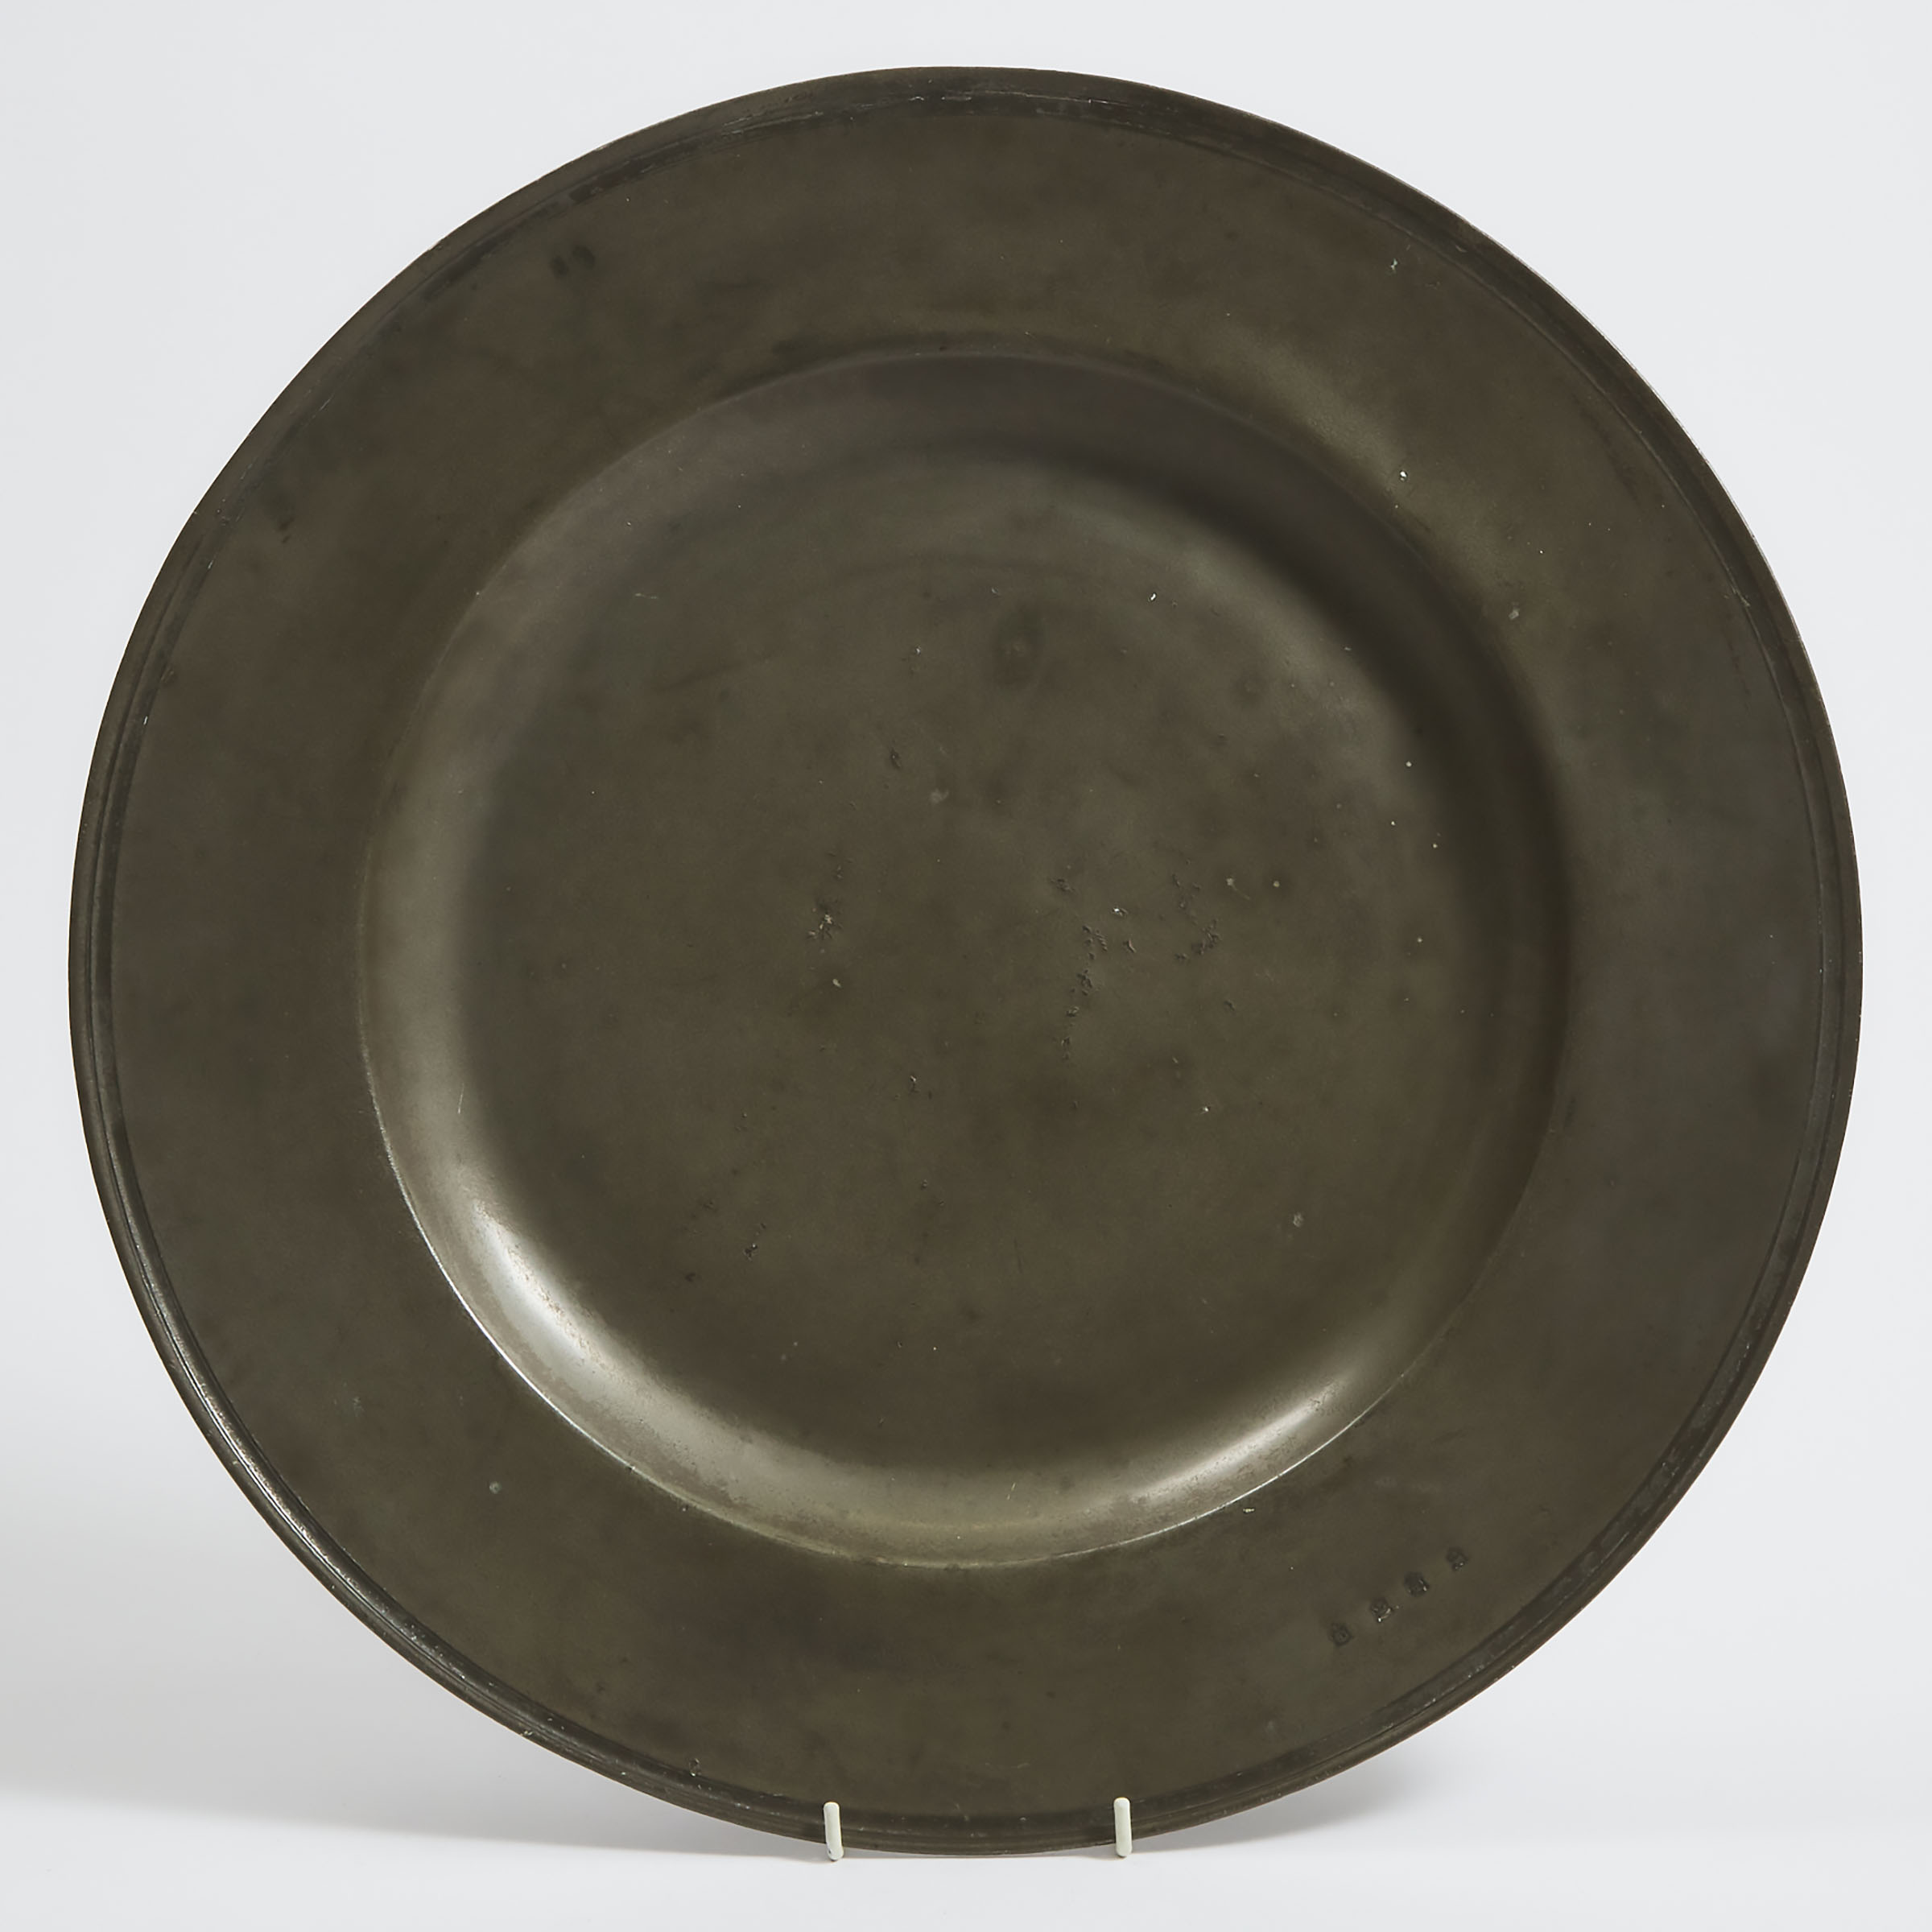 Early English Pewter Broad Rim Charger by Edmund Harvey, Wigan, 1651-1685